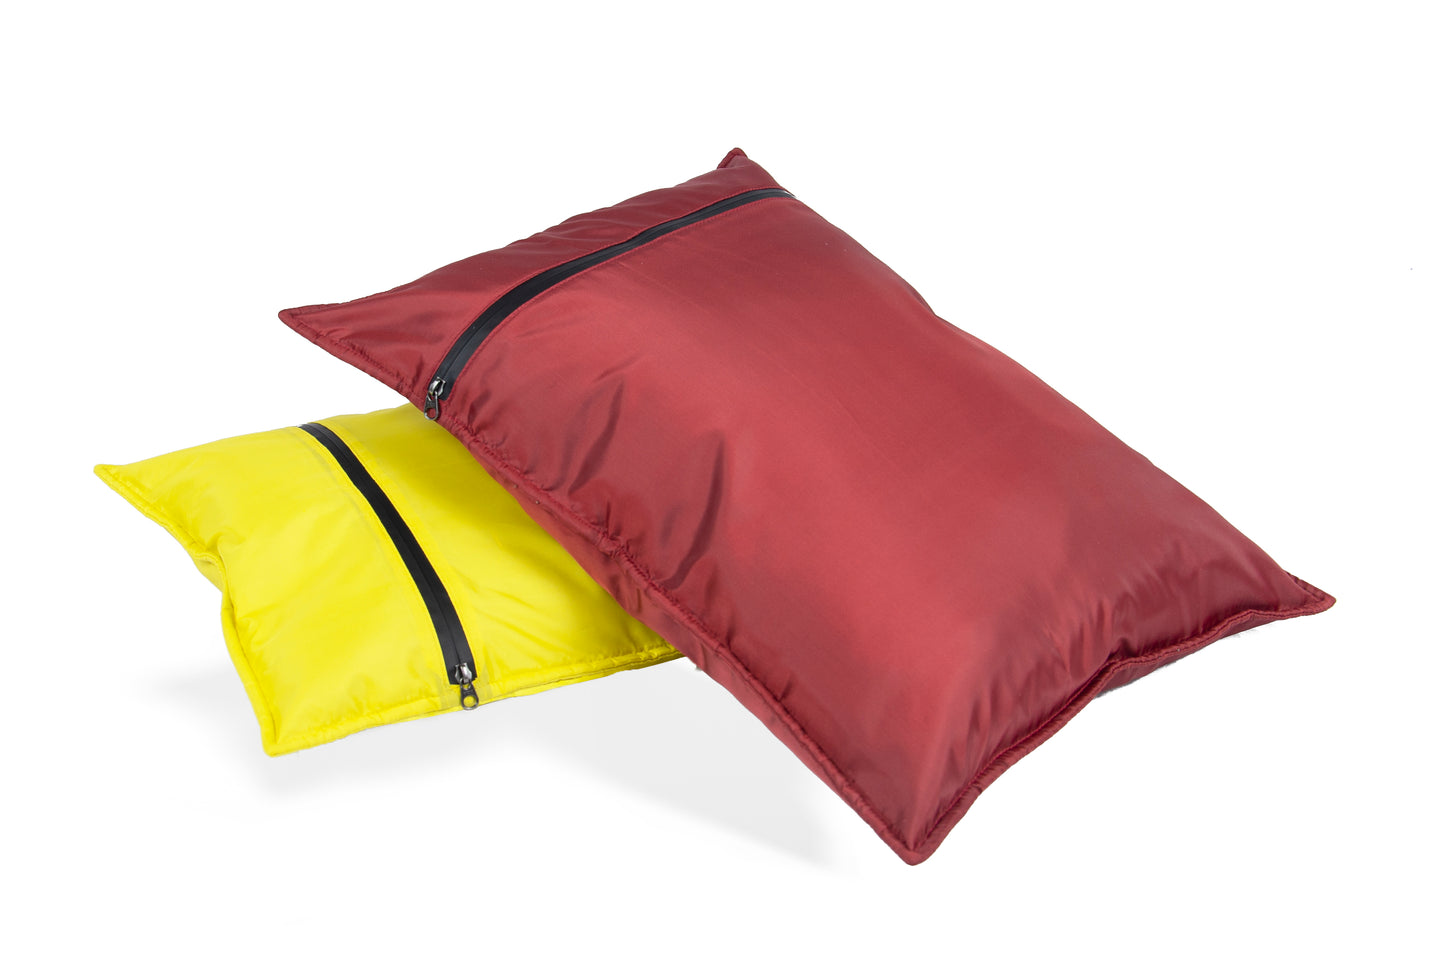 Elan Quest Stuffable Camping Pillow Stuff Sack (Yellow/Small) - Reversible Lightweight Water Resistant - Bring Your Own Stuffing